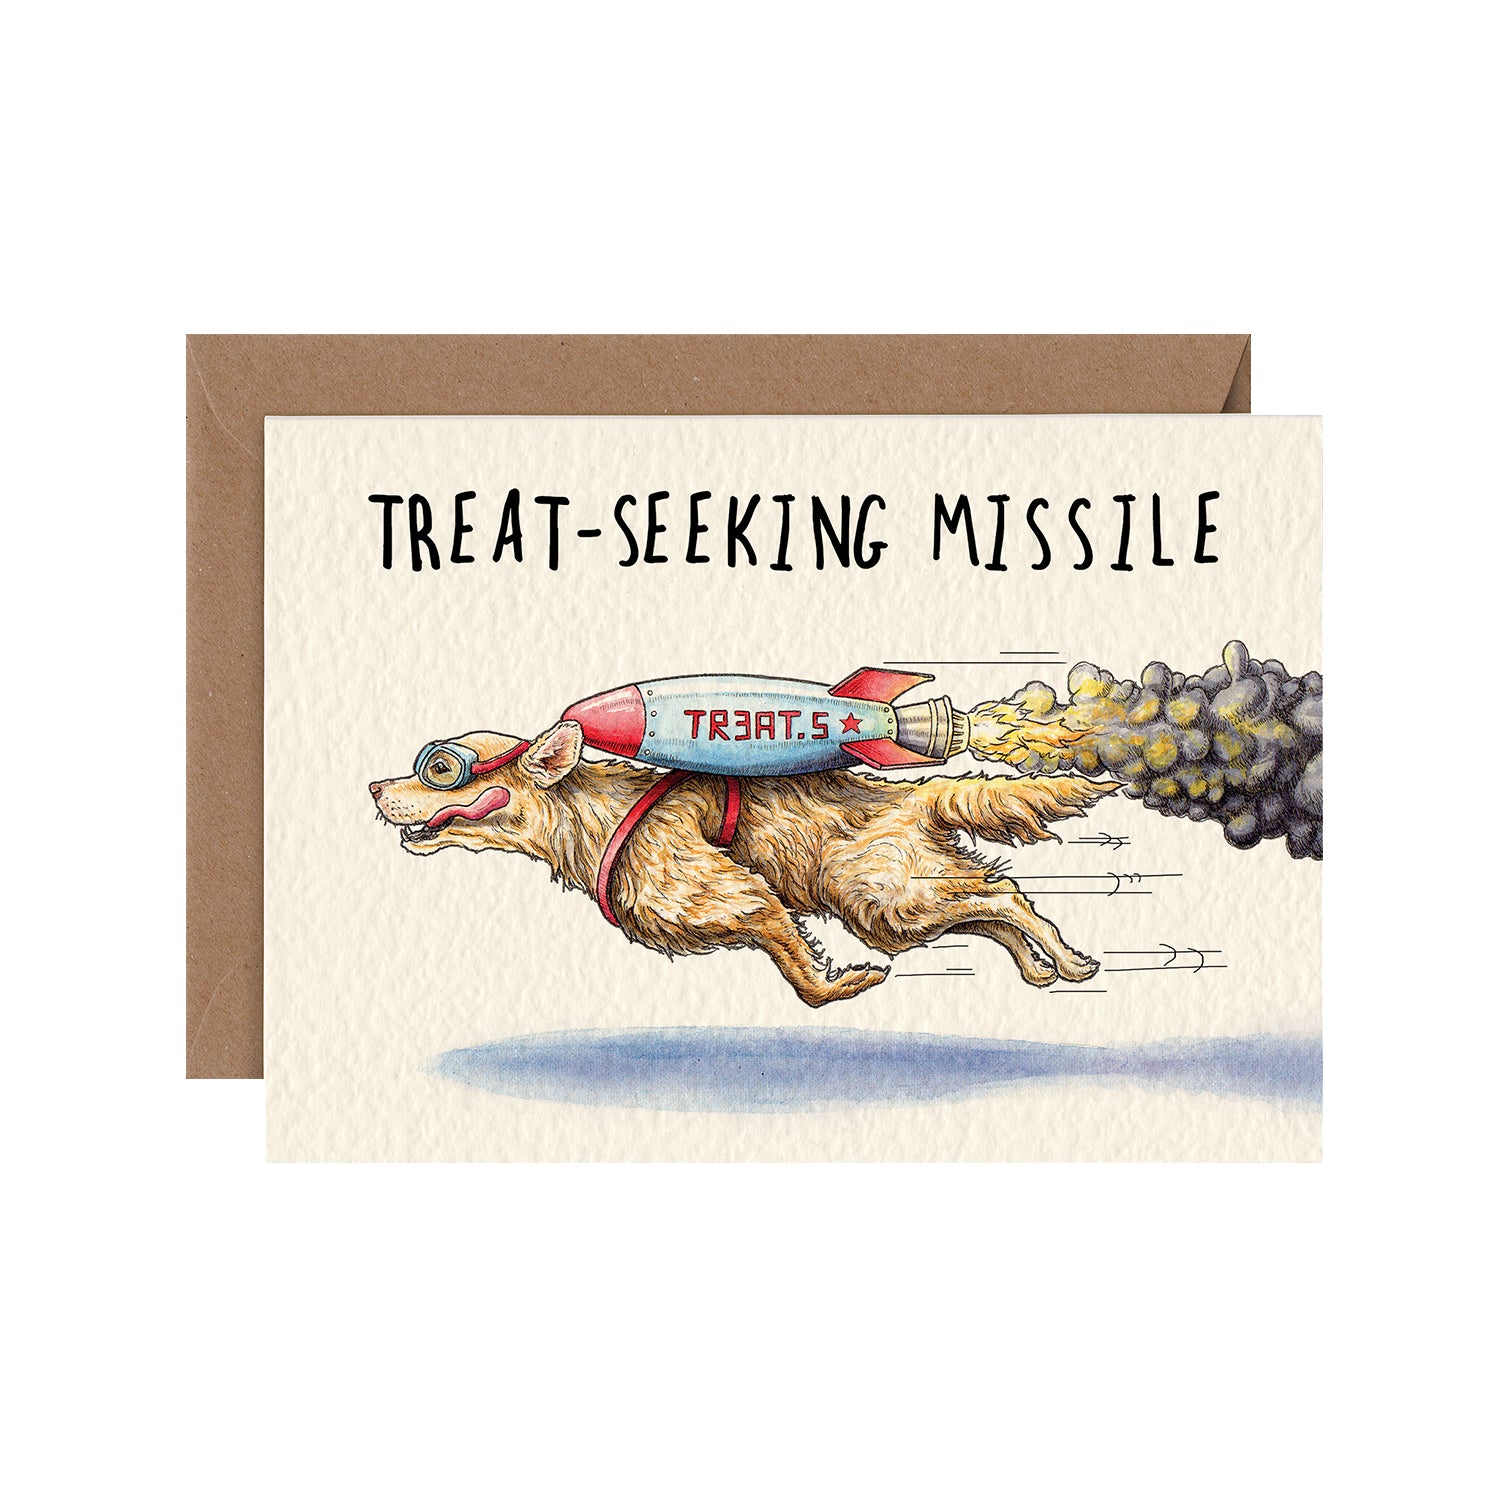 A funny illustration of a golden retriever flying by wearing a rocket strapped to its back and goggles, under the caption &quot;Treat-Seeking Missile&quot;.